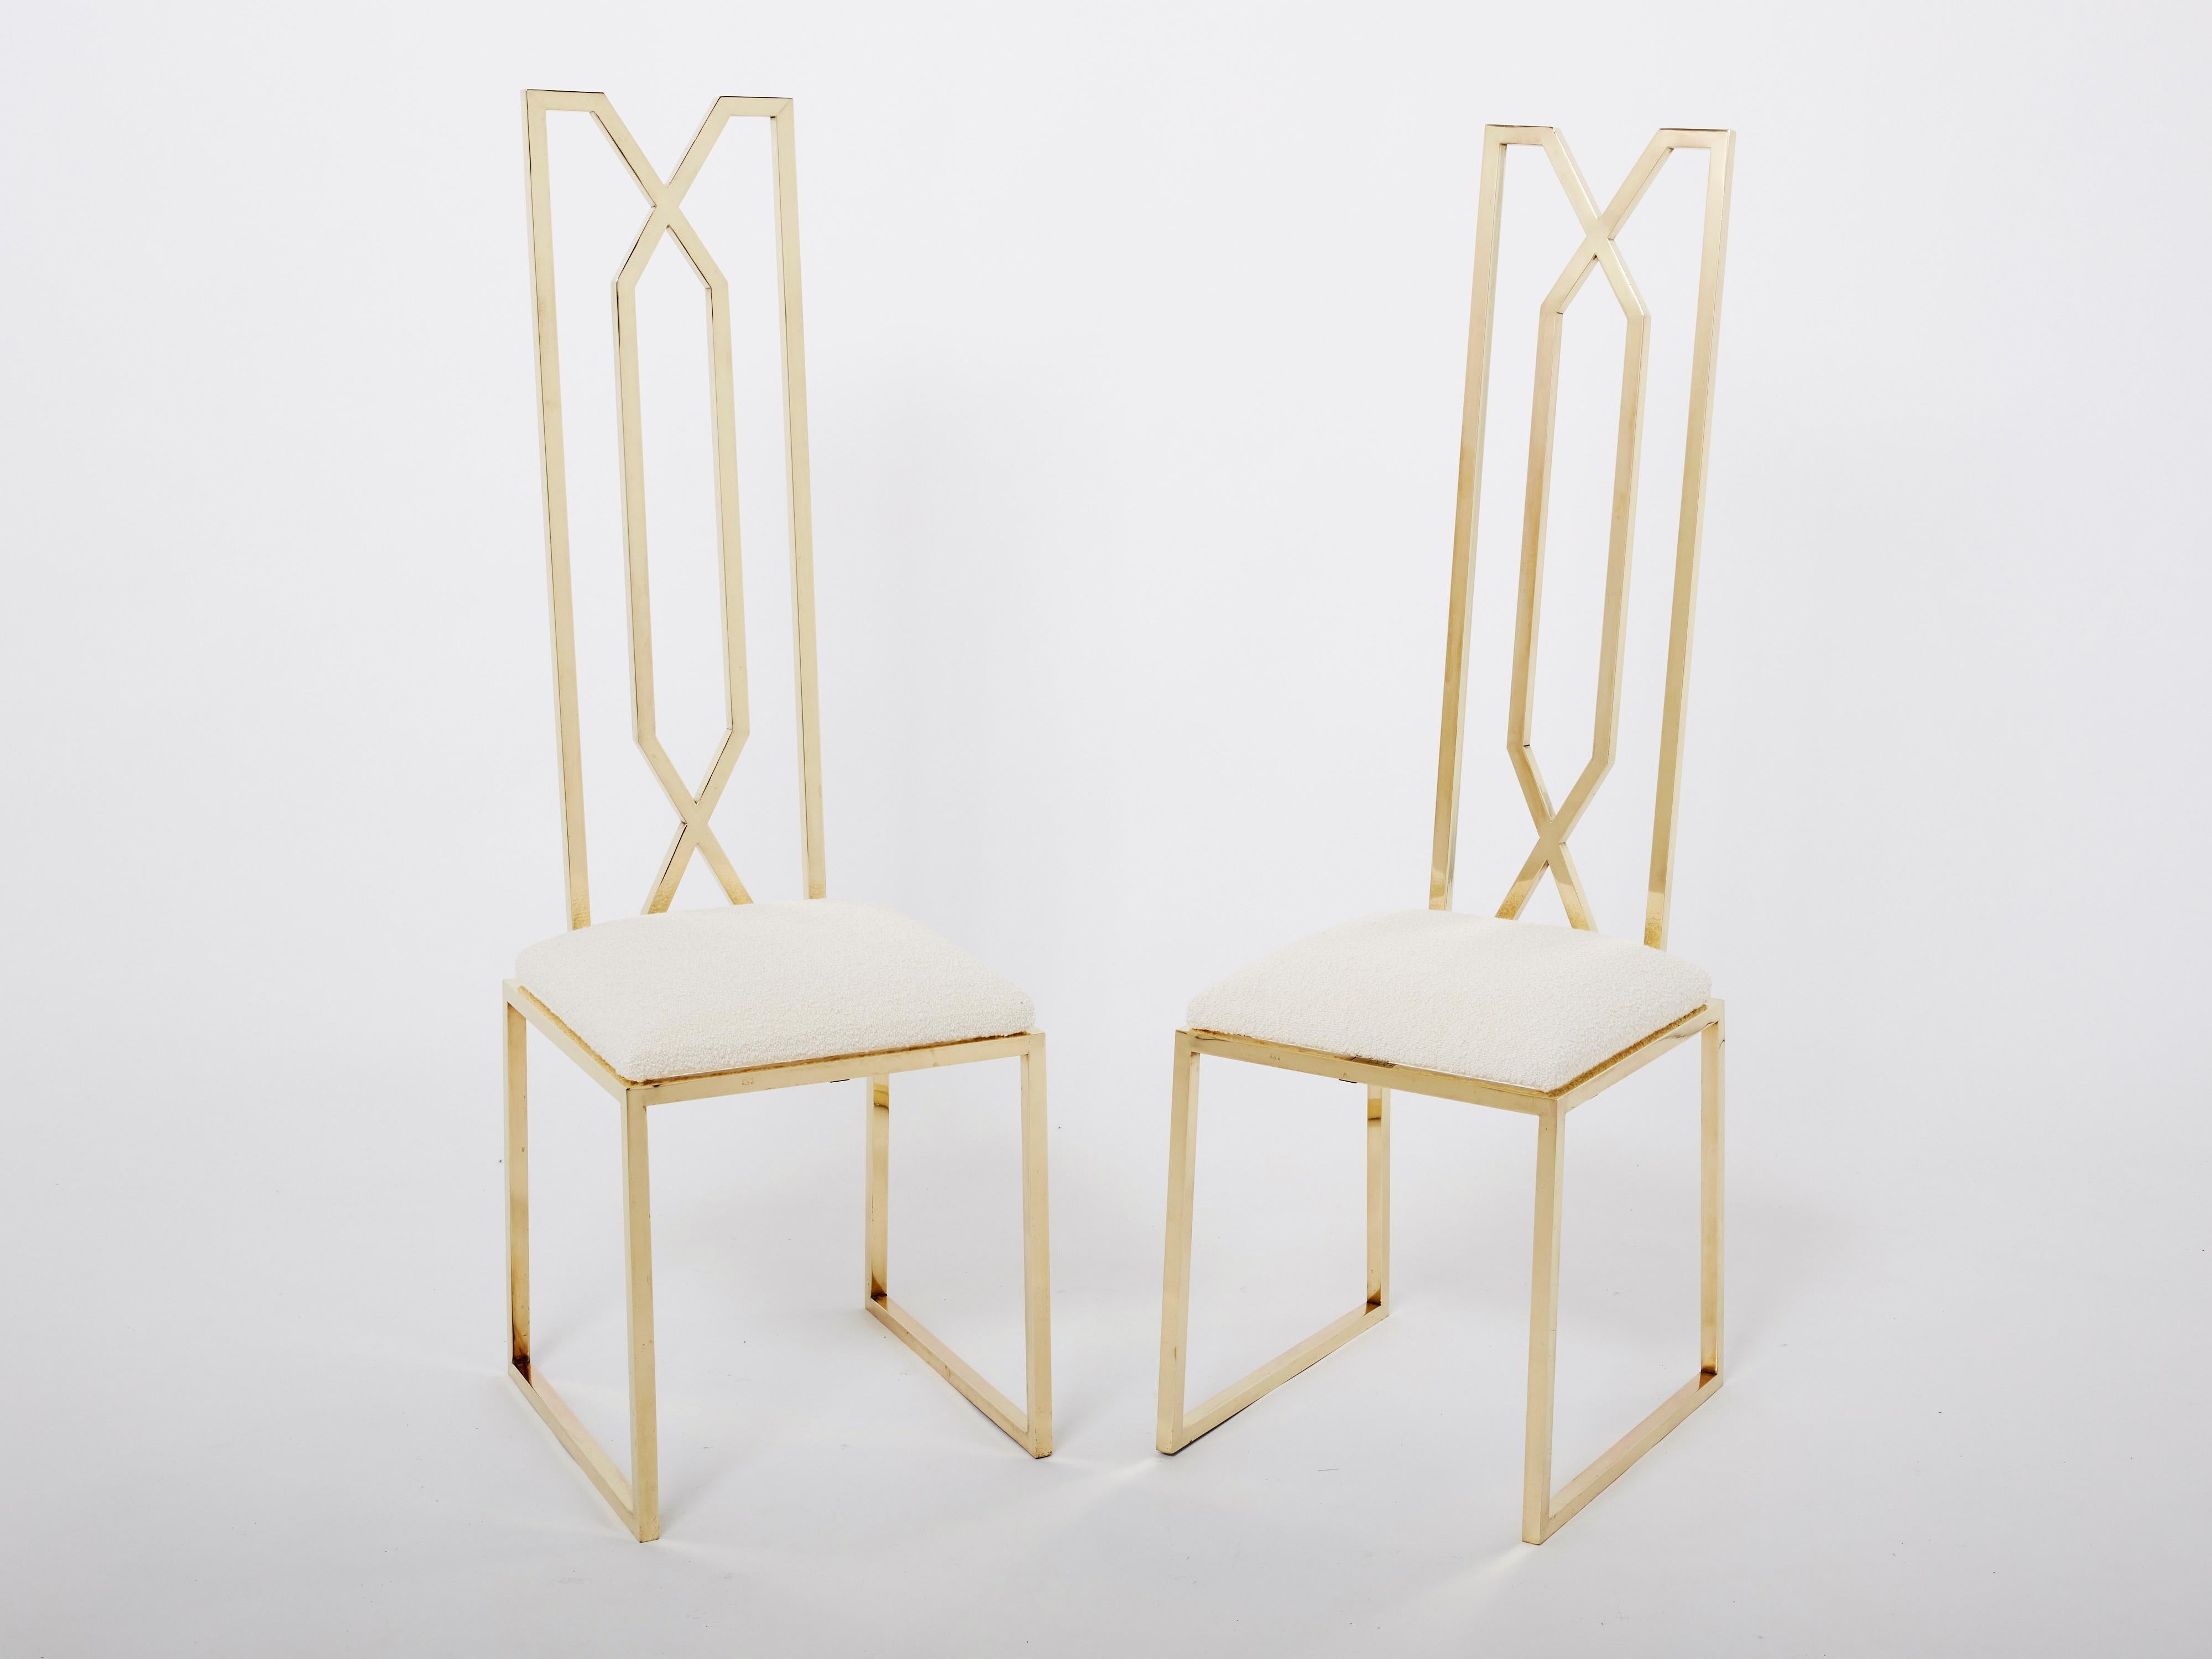 French actor and designer Alain Delon extravagant tastes are evident in this pair of French mid-century chairs. Edited by Jean Charles in the mid-1970s, they are definitely a rare find. Cool brass is fashioned into an inventive, geometric design